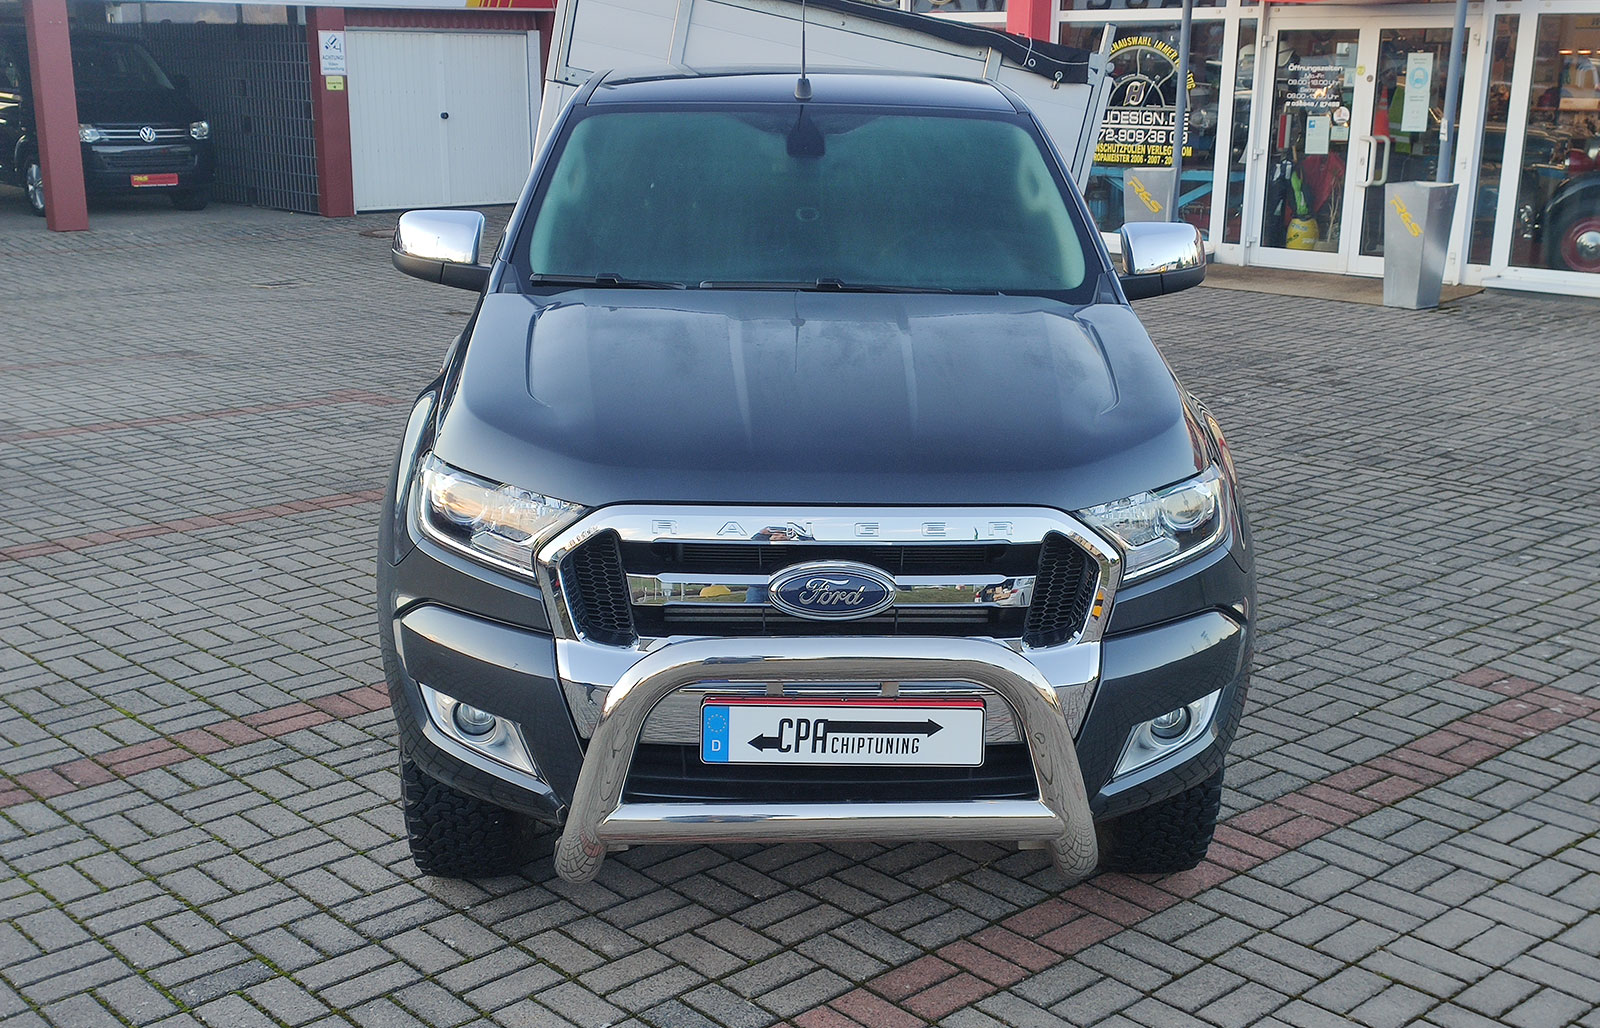 Ford Ranger 2.2 TDCi chip tuning